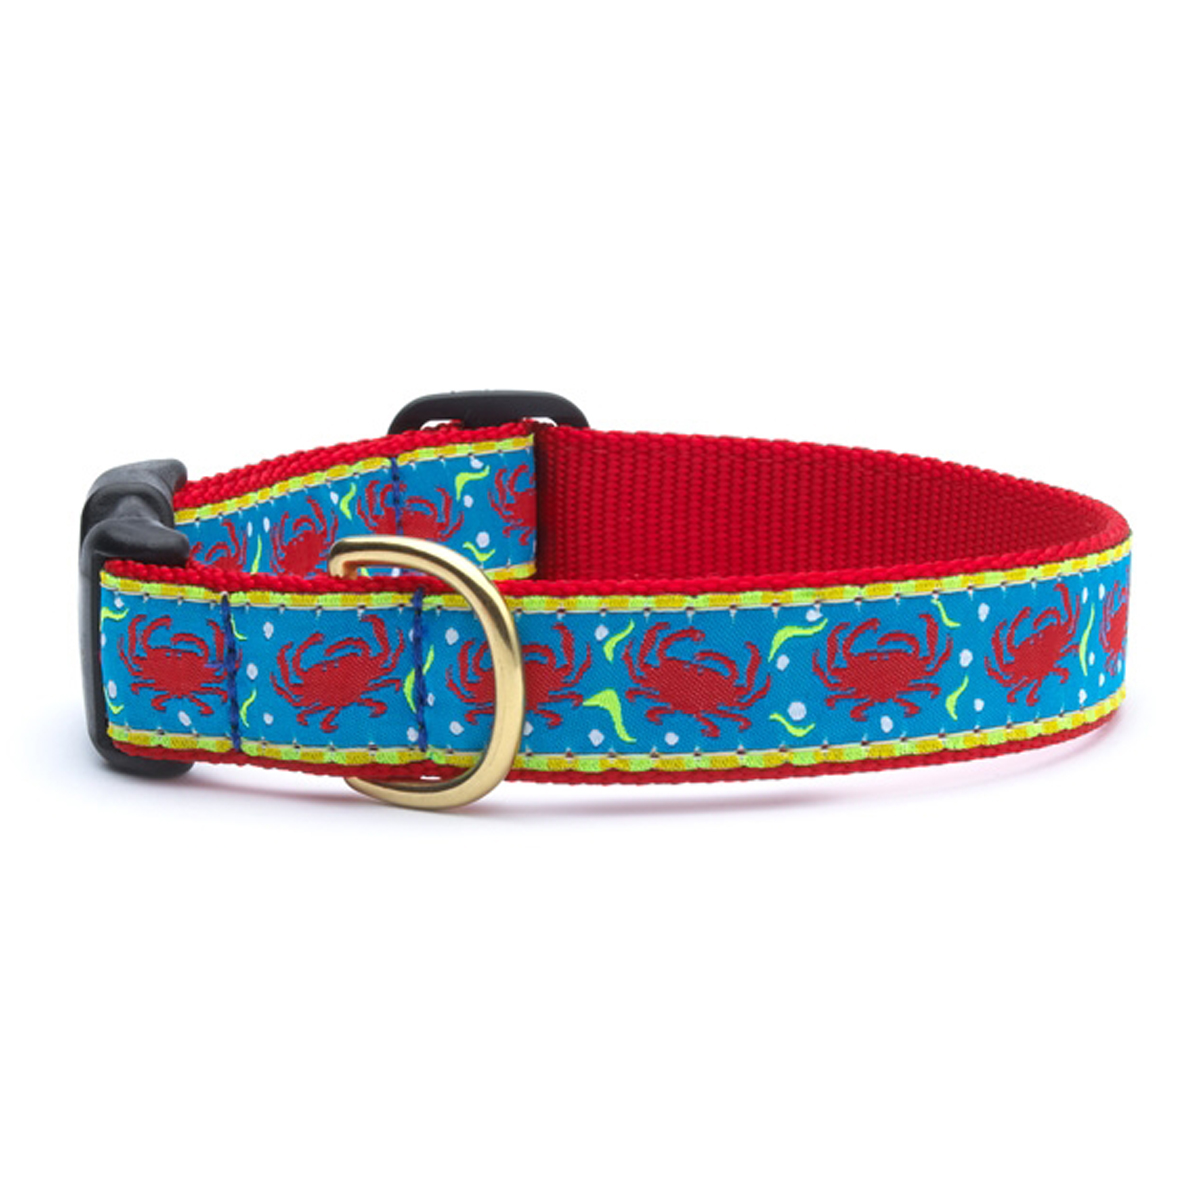 Crabby Dog Collar by Up Country